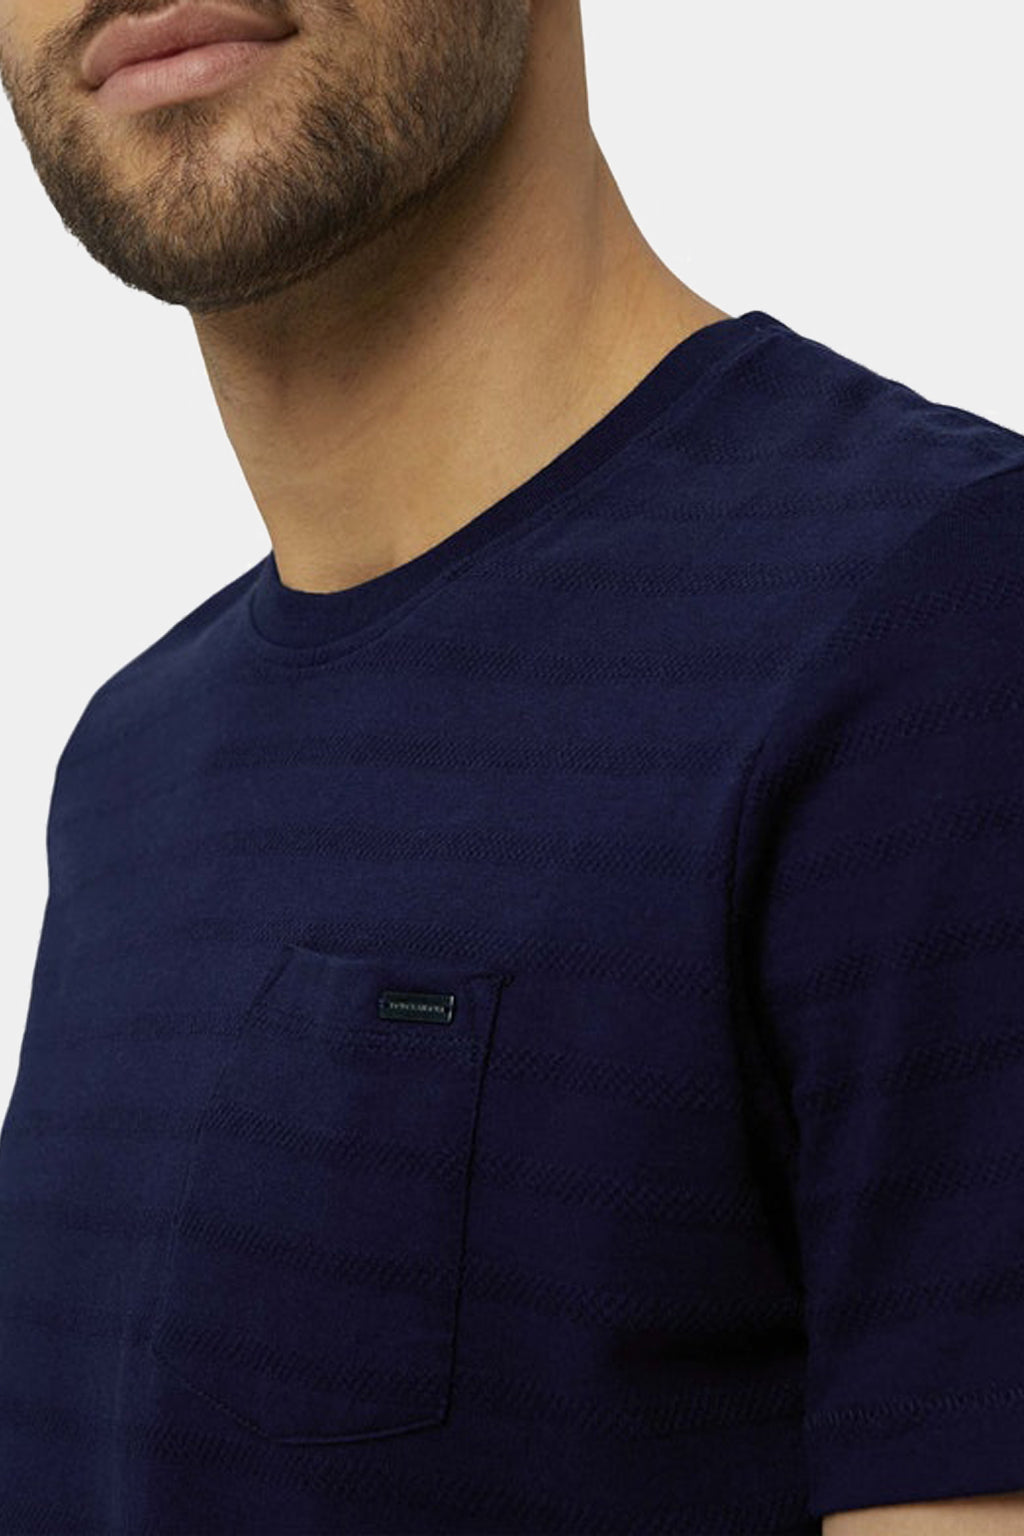 Tom Tailor - T-Shirt With Textured Stripes